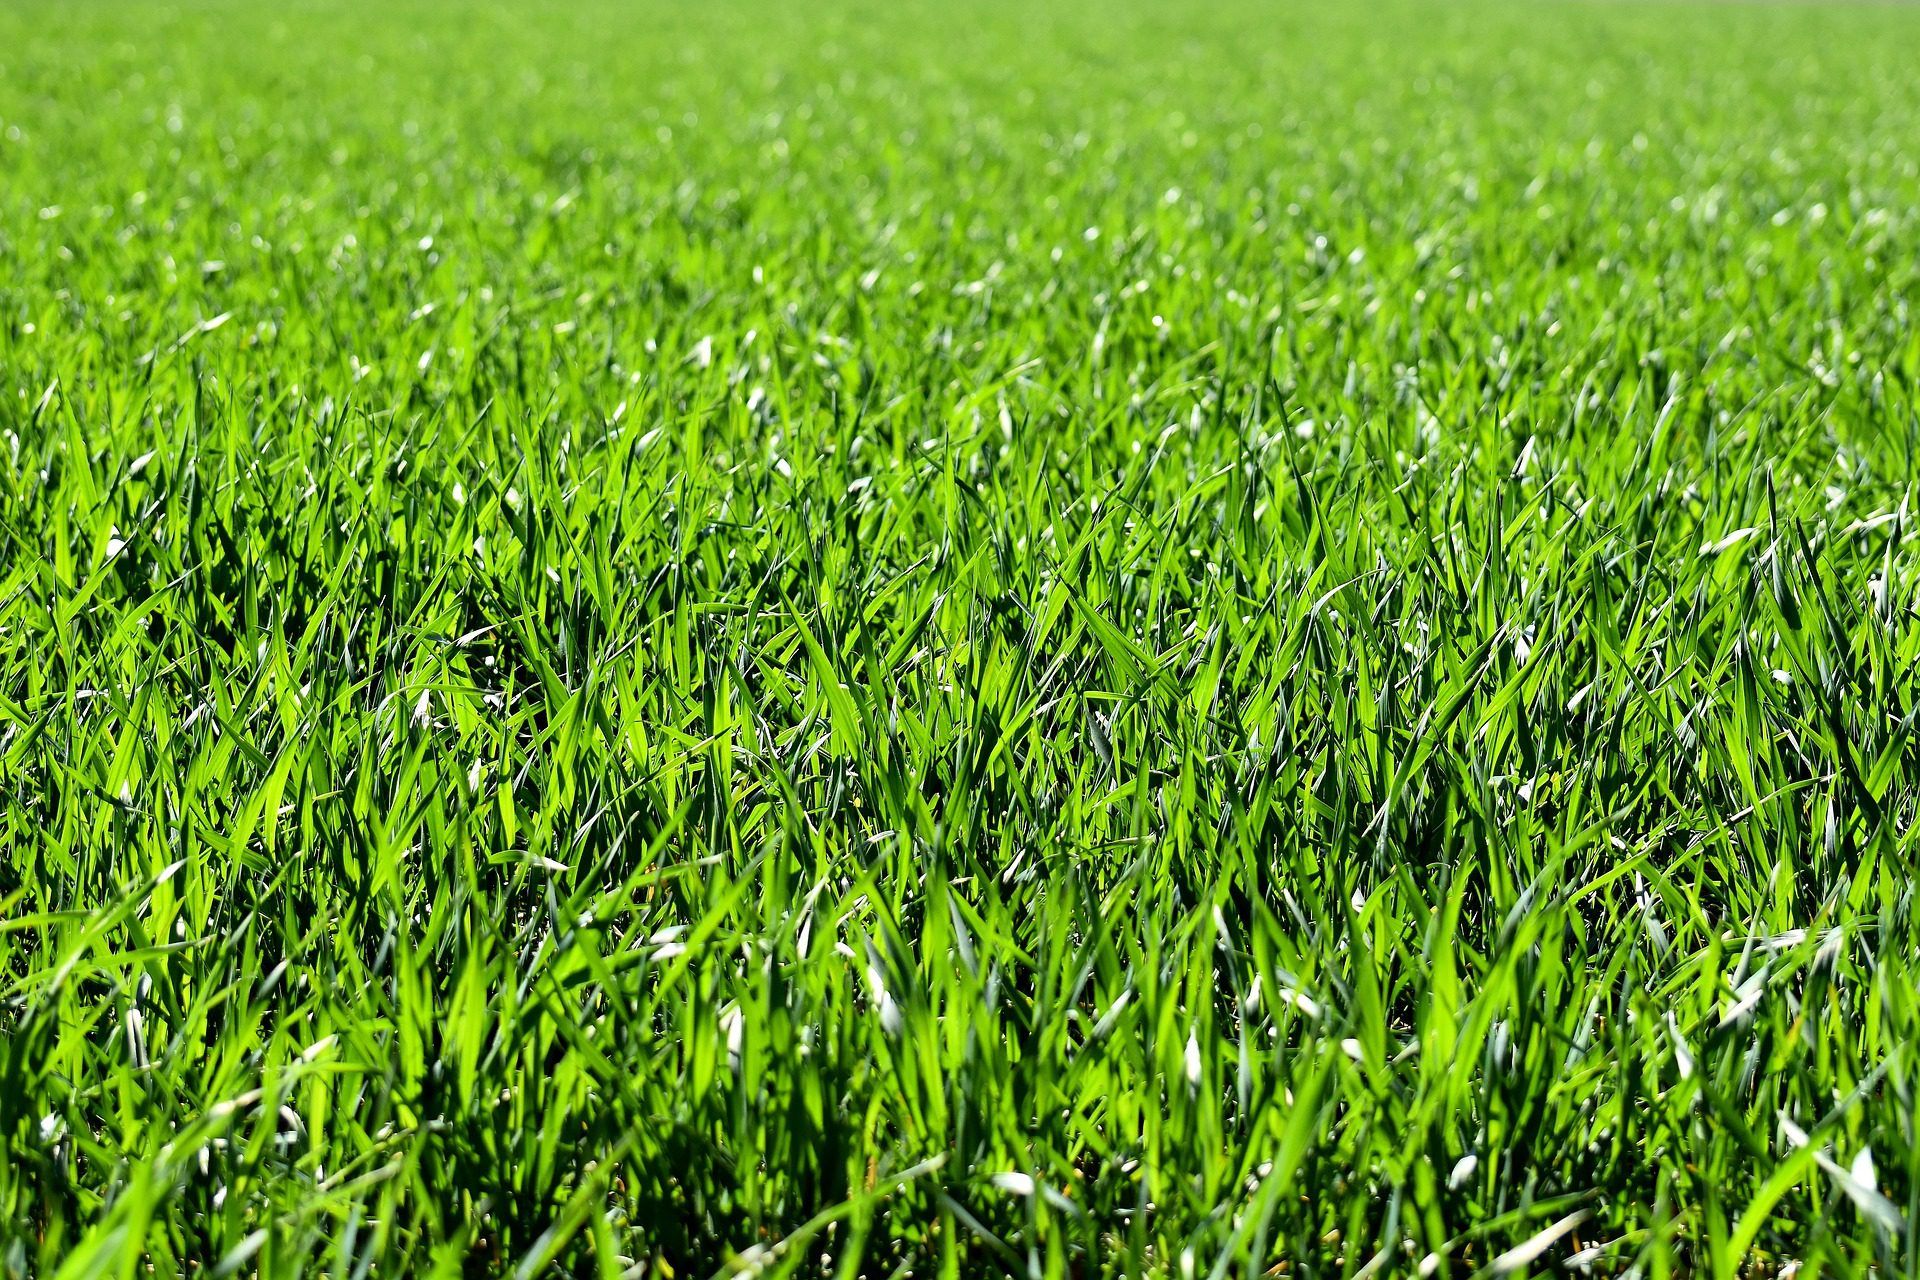 A large field with green grass